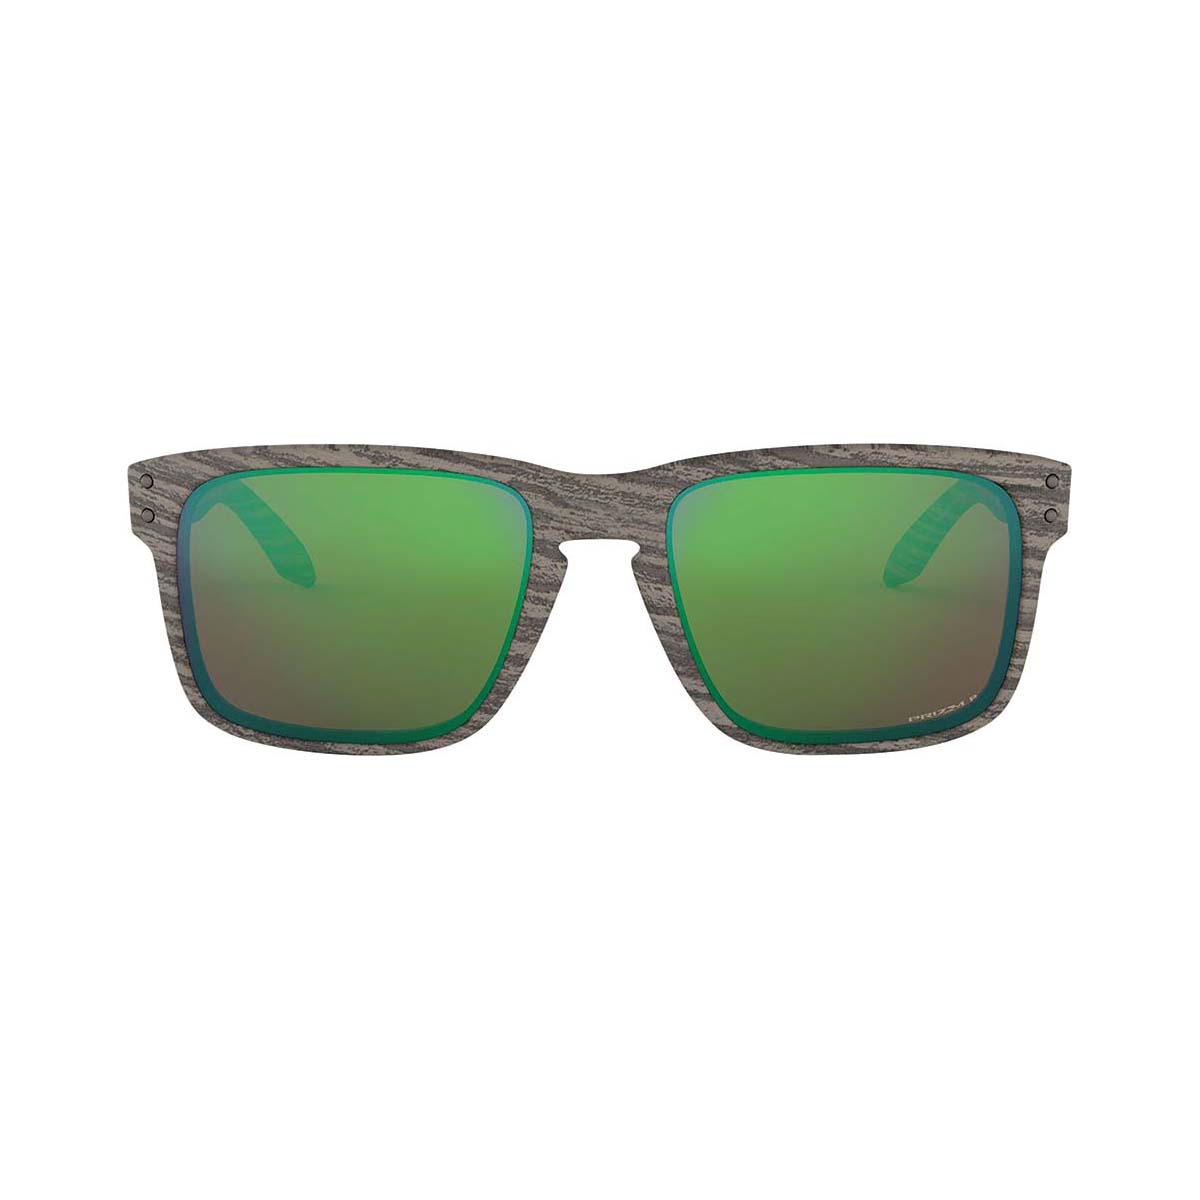 Oakley Holbrook PRIZM Polarised Sunglasses with Green Lens